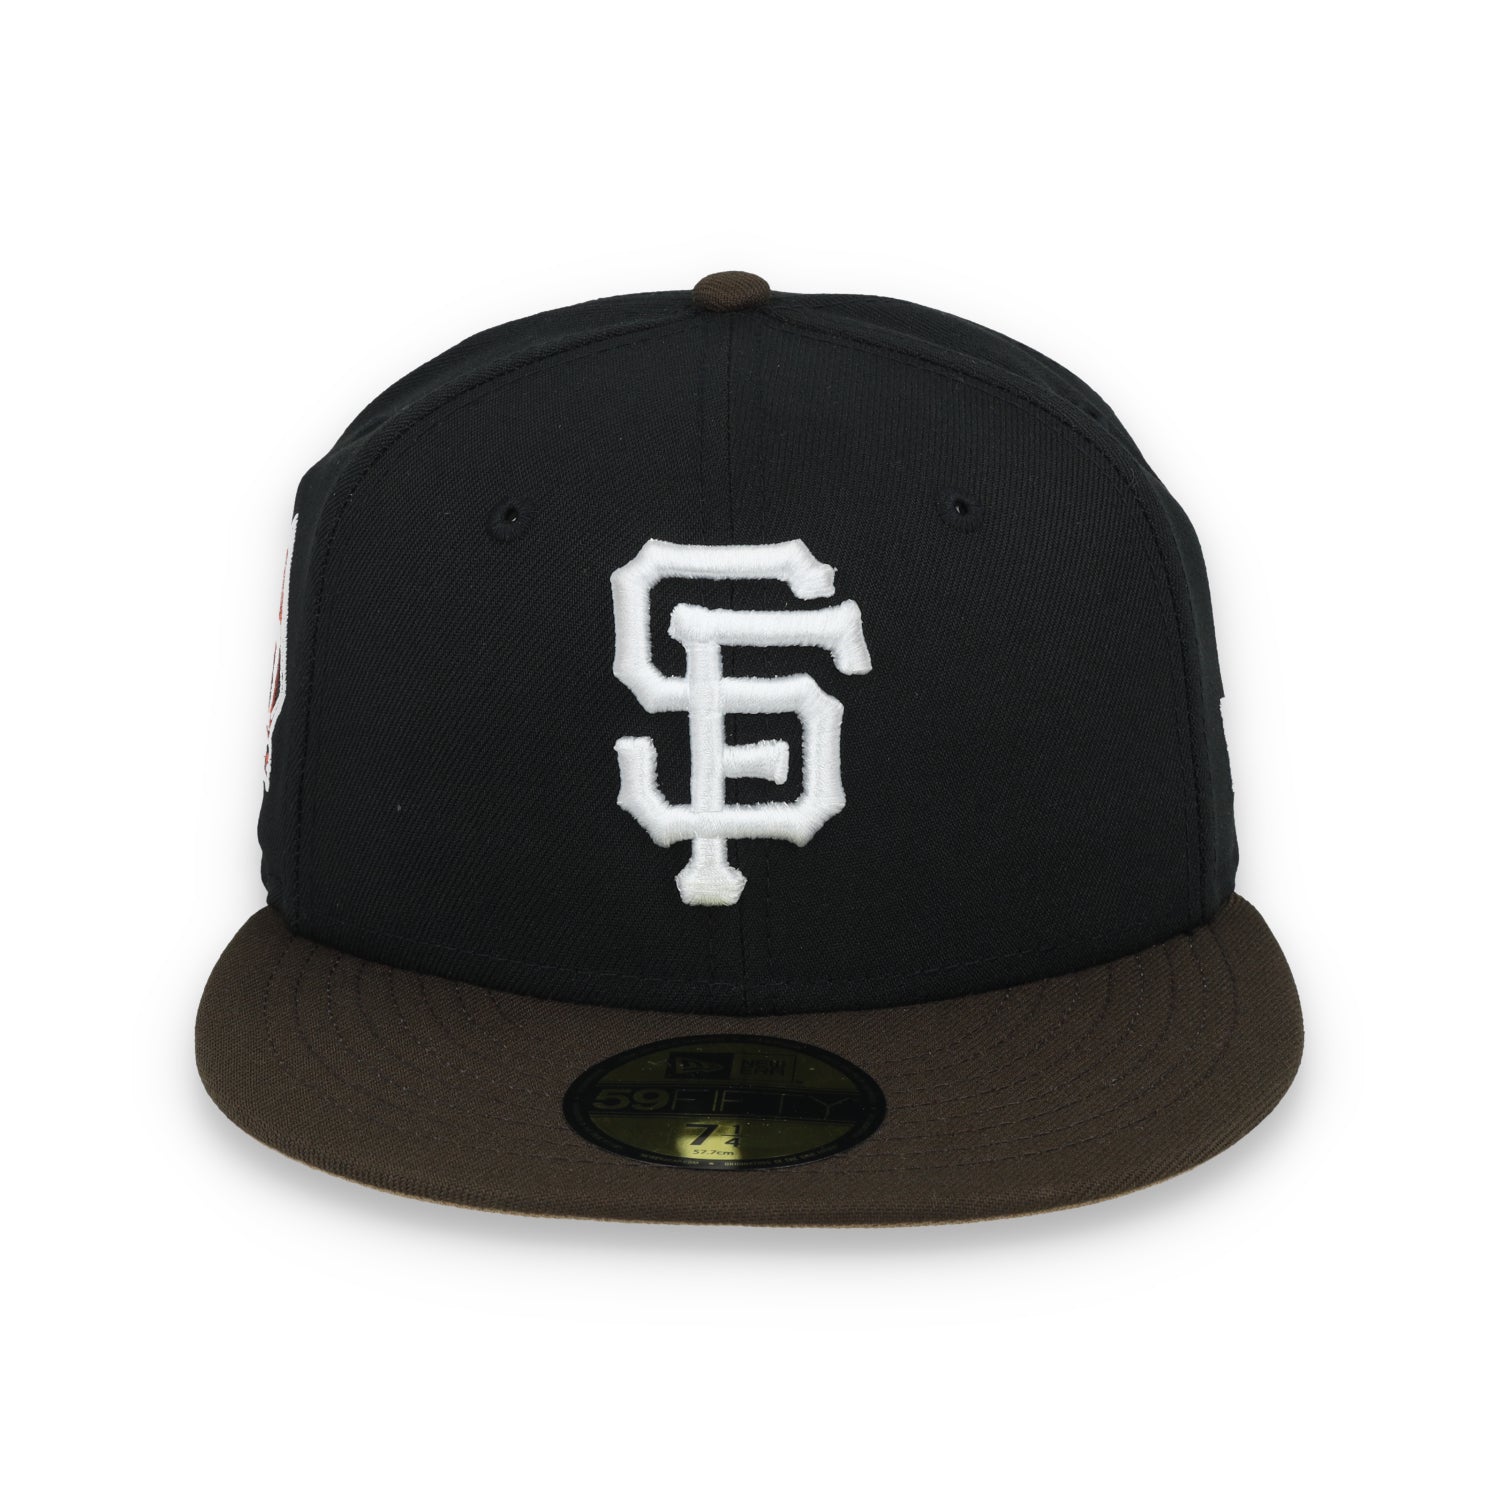 New Era San Francisco Giants 60th Anniversary Side Patch 59IFTY Fitted hat-Black/Brown